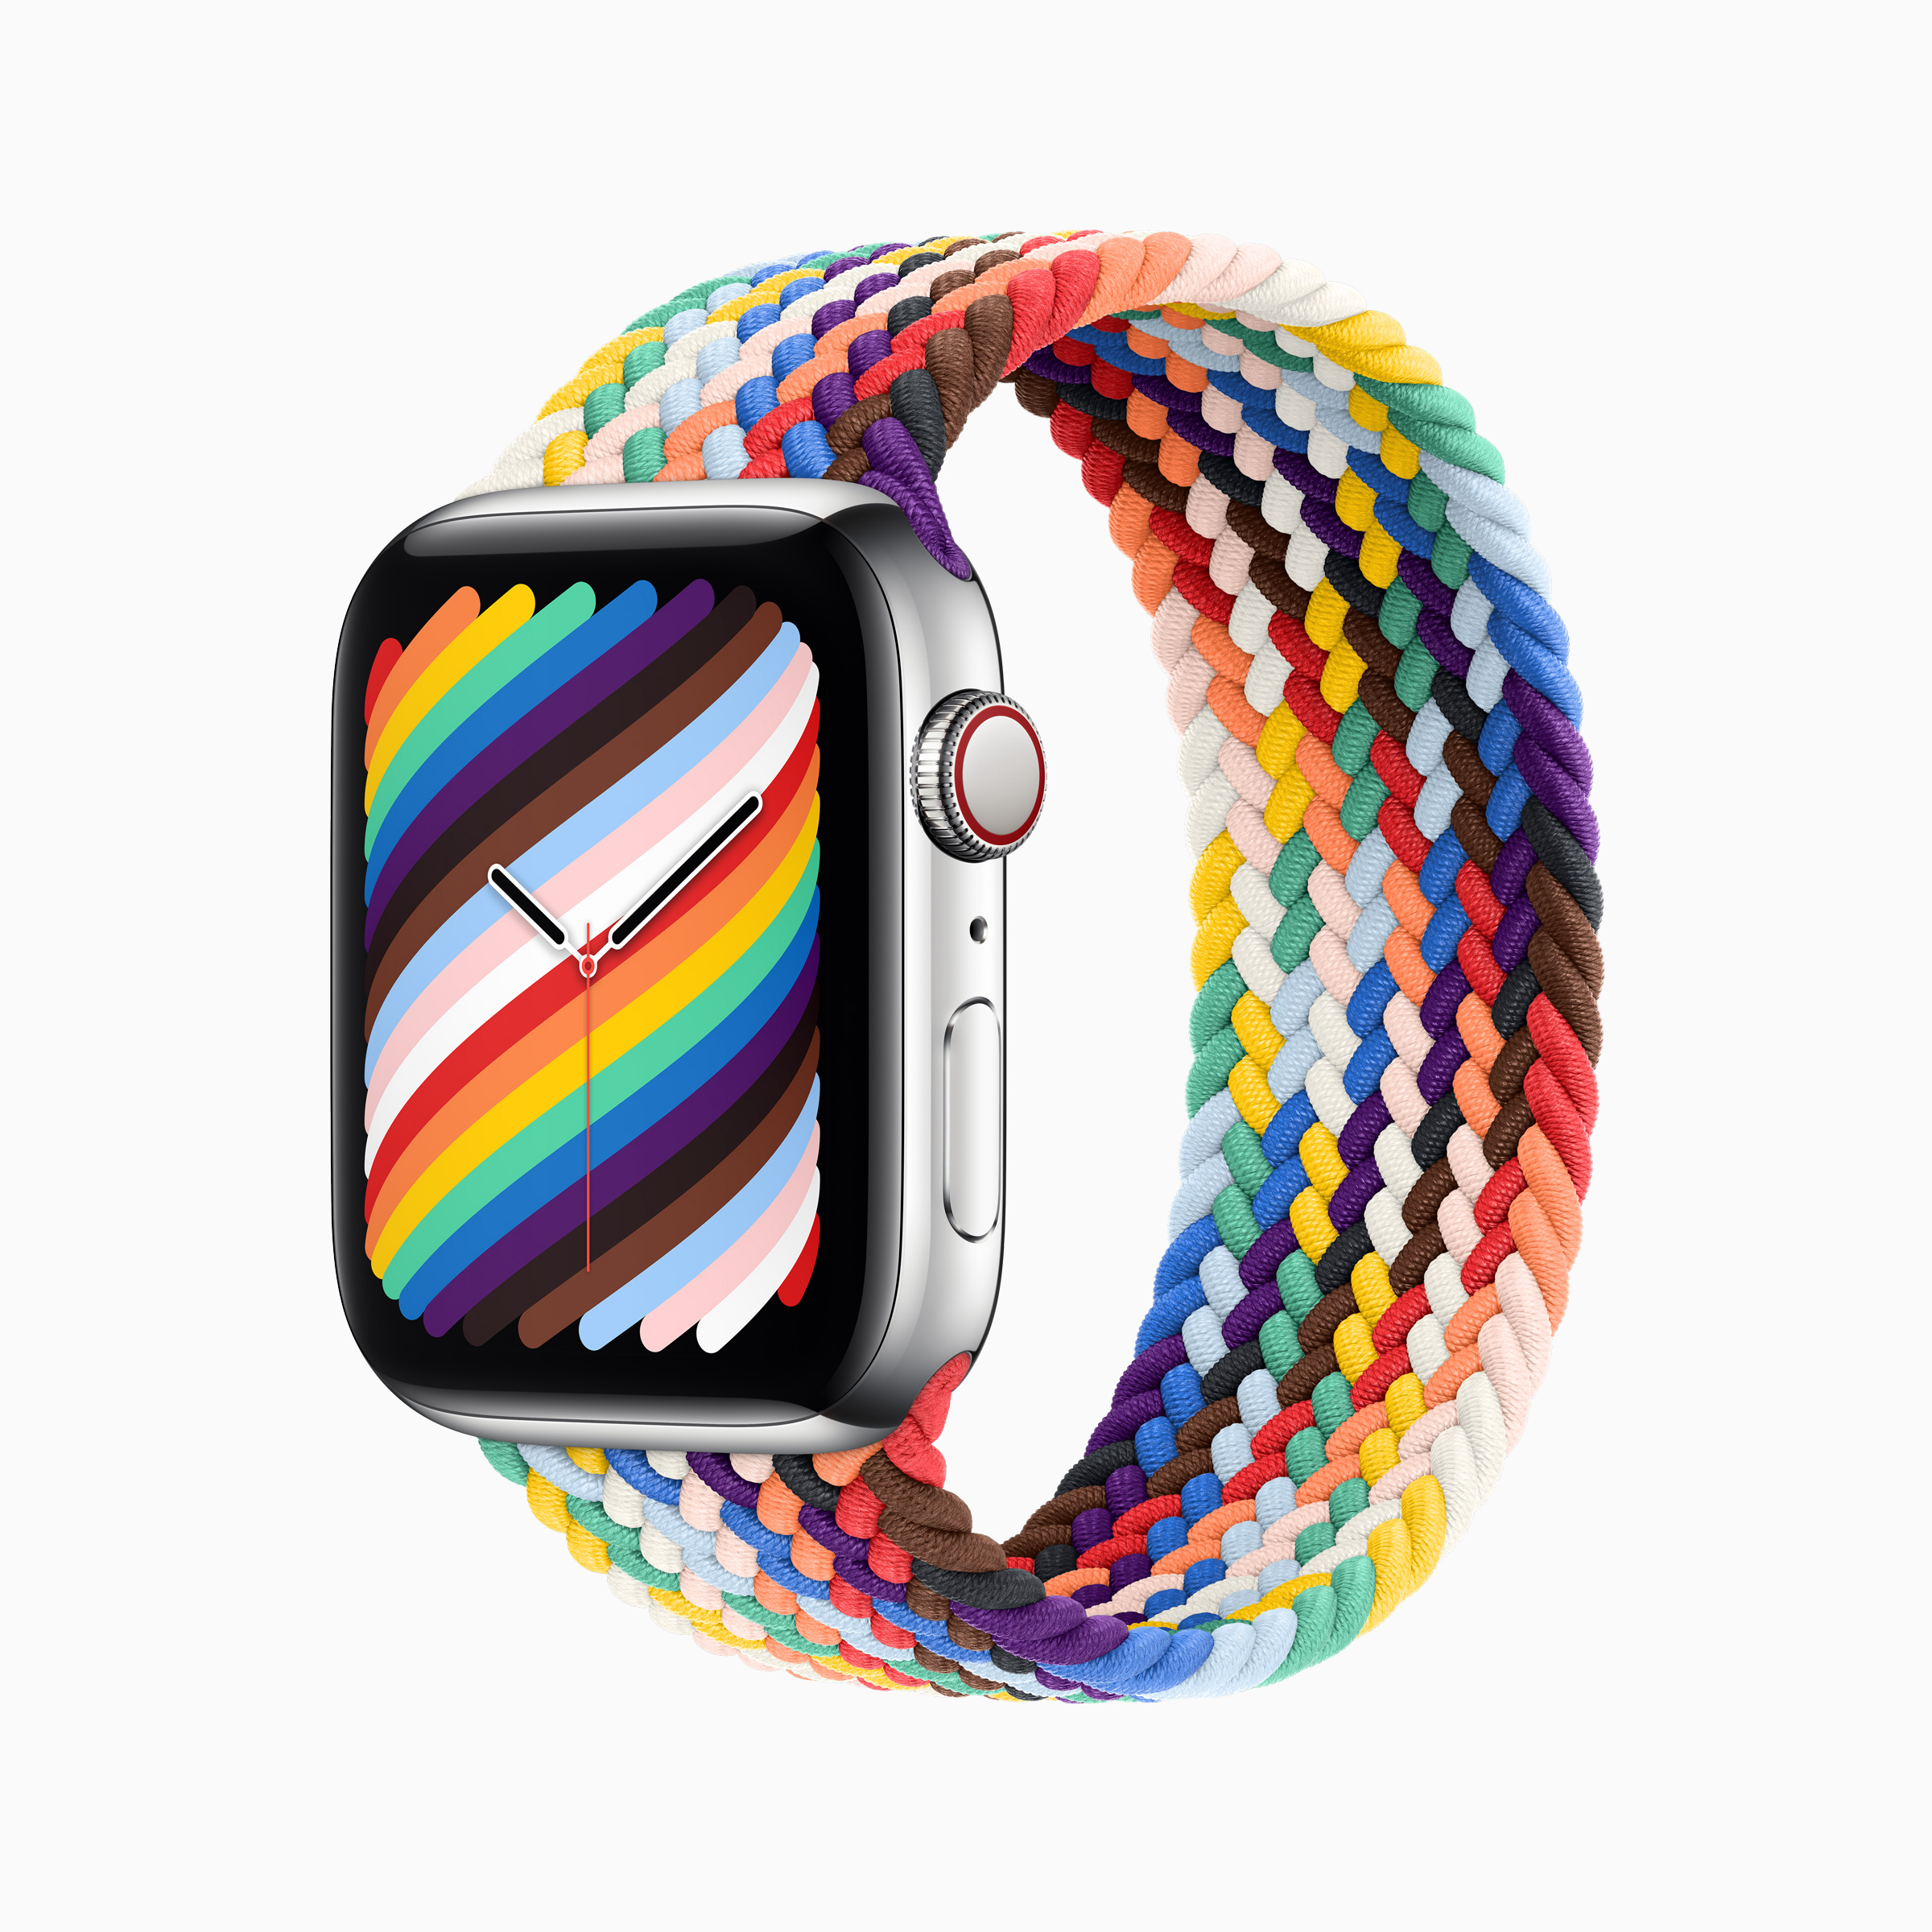 Apple to Launch Apple Watch ‘Pride’ Edition and New Bands as Soon as This Week